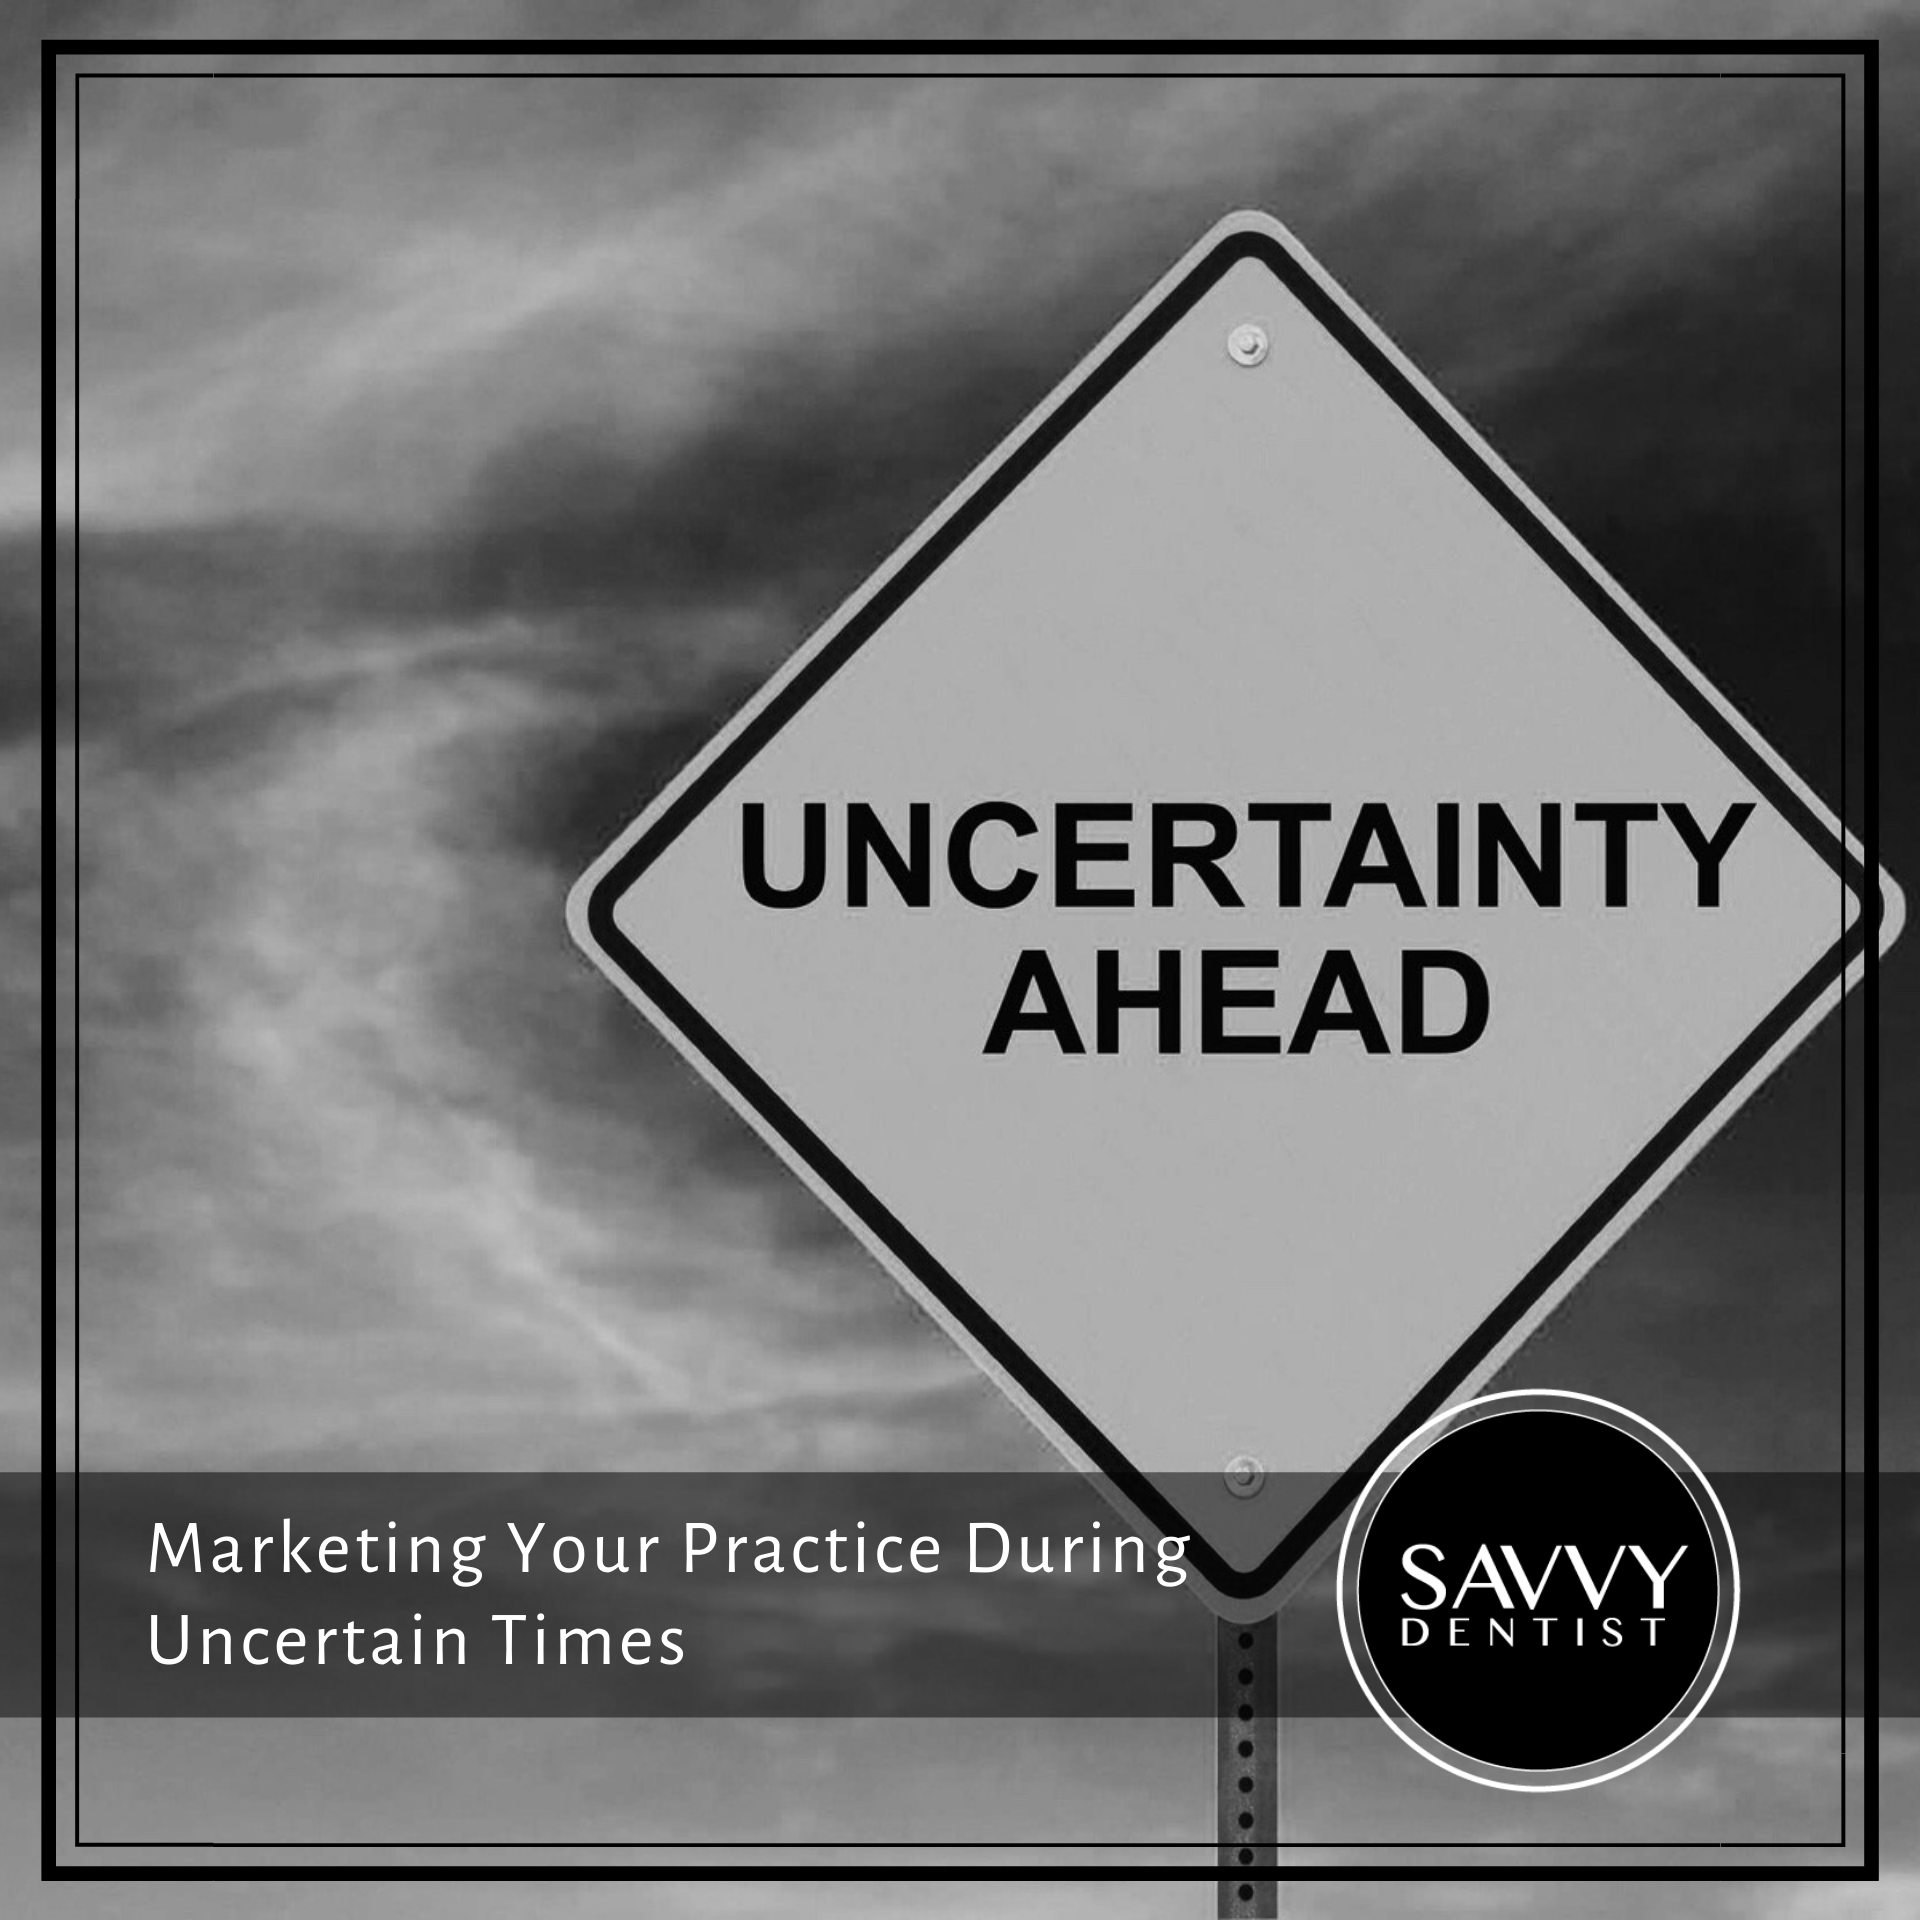 Marketing Your Practice During Uncertain Times